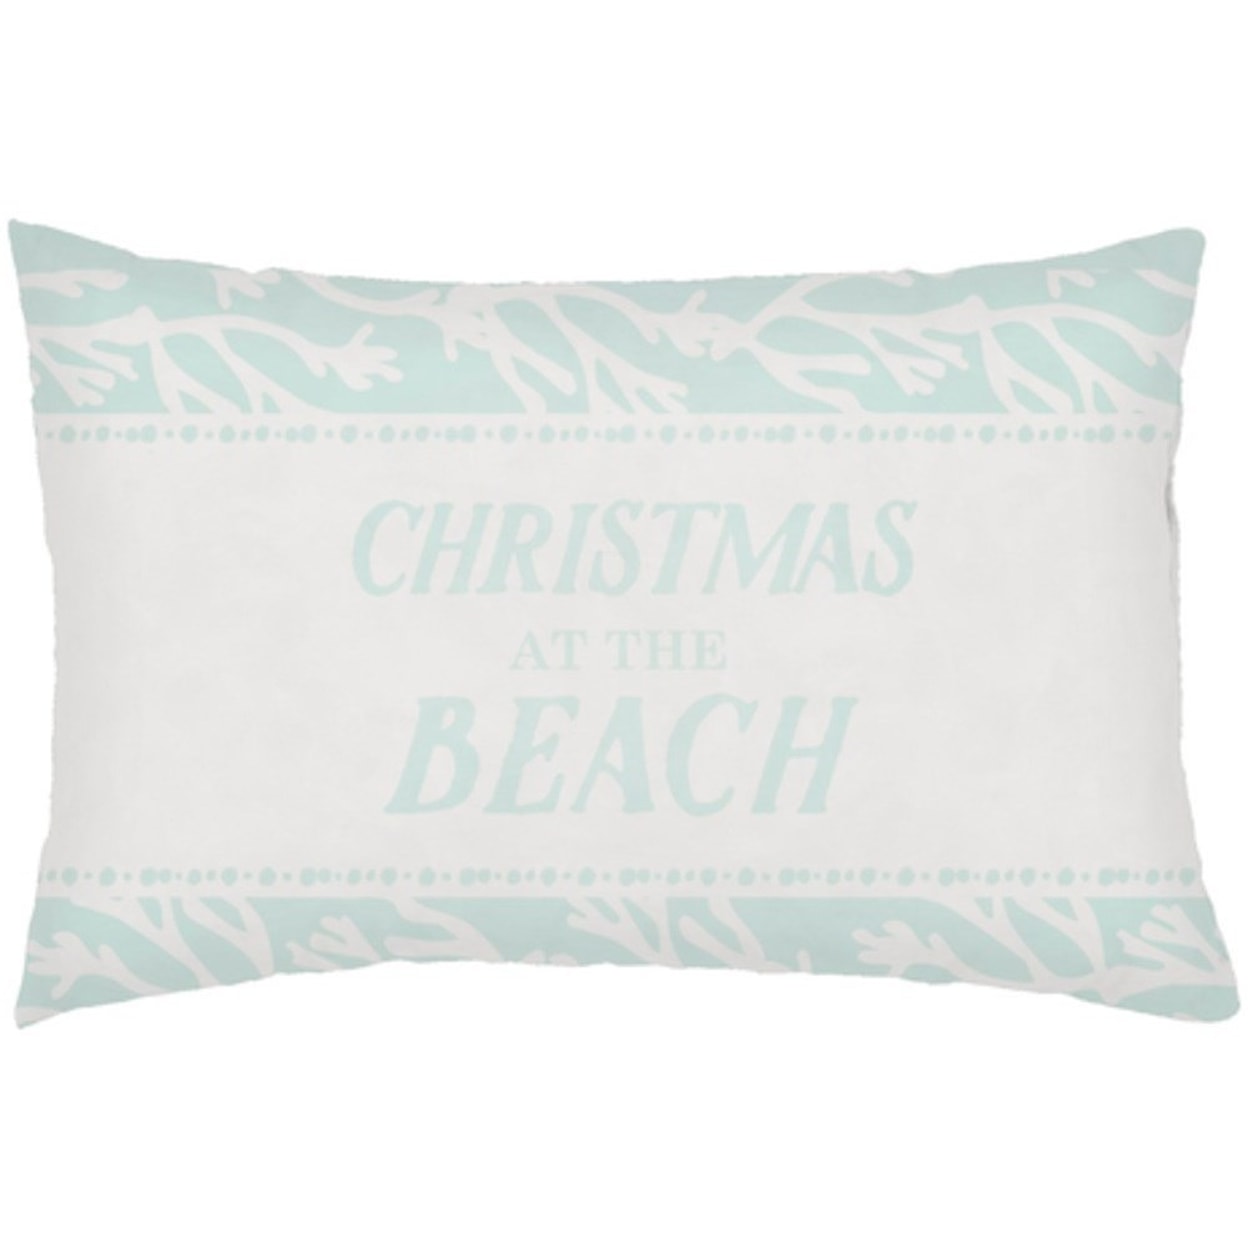 Ruby-Gordon Accents Sea-sons Greetings Pillow